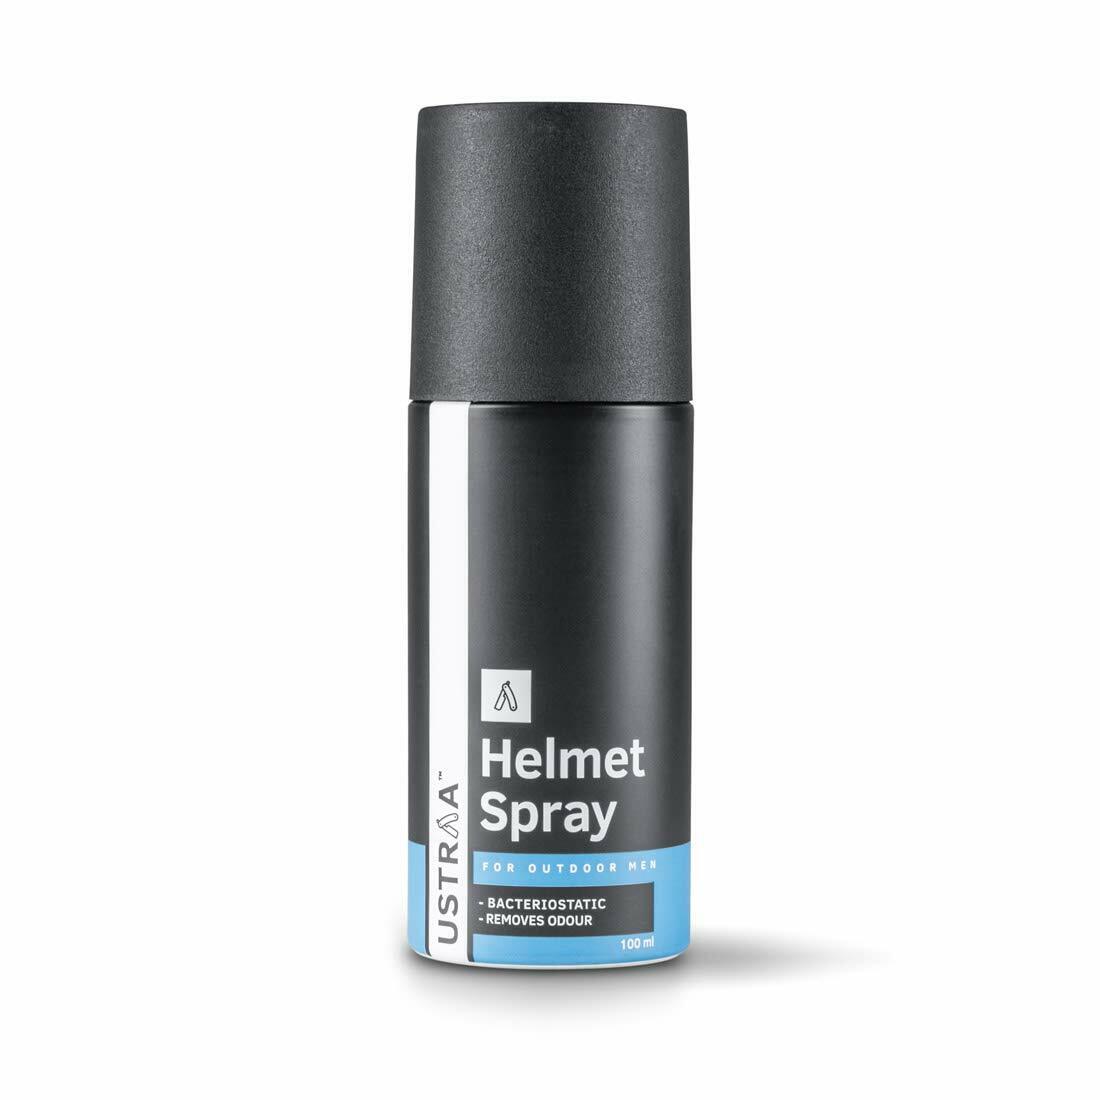 Ustraa Fees free Helmet Spray Sale Special Price Anti Fungal Smell Fresh And 100 Clean